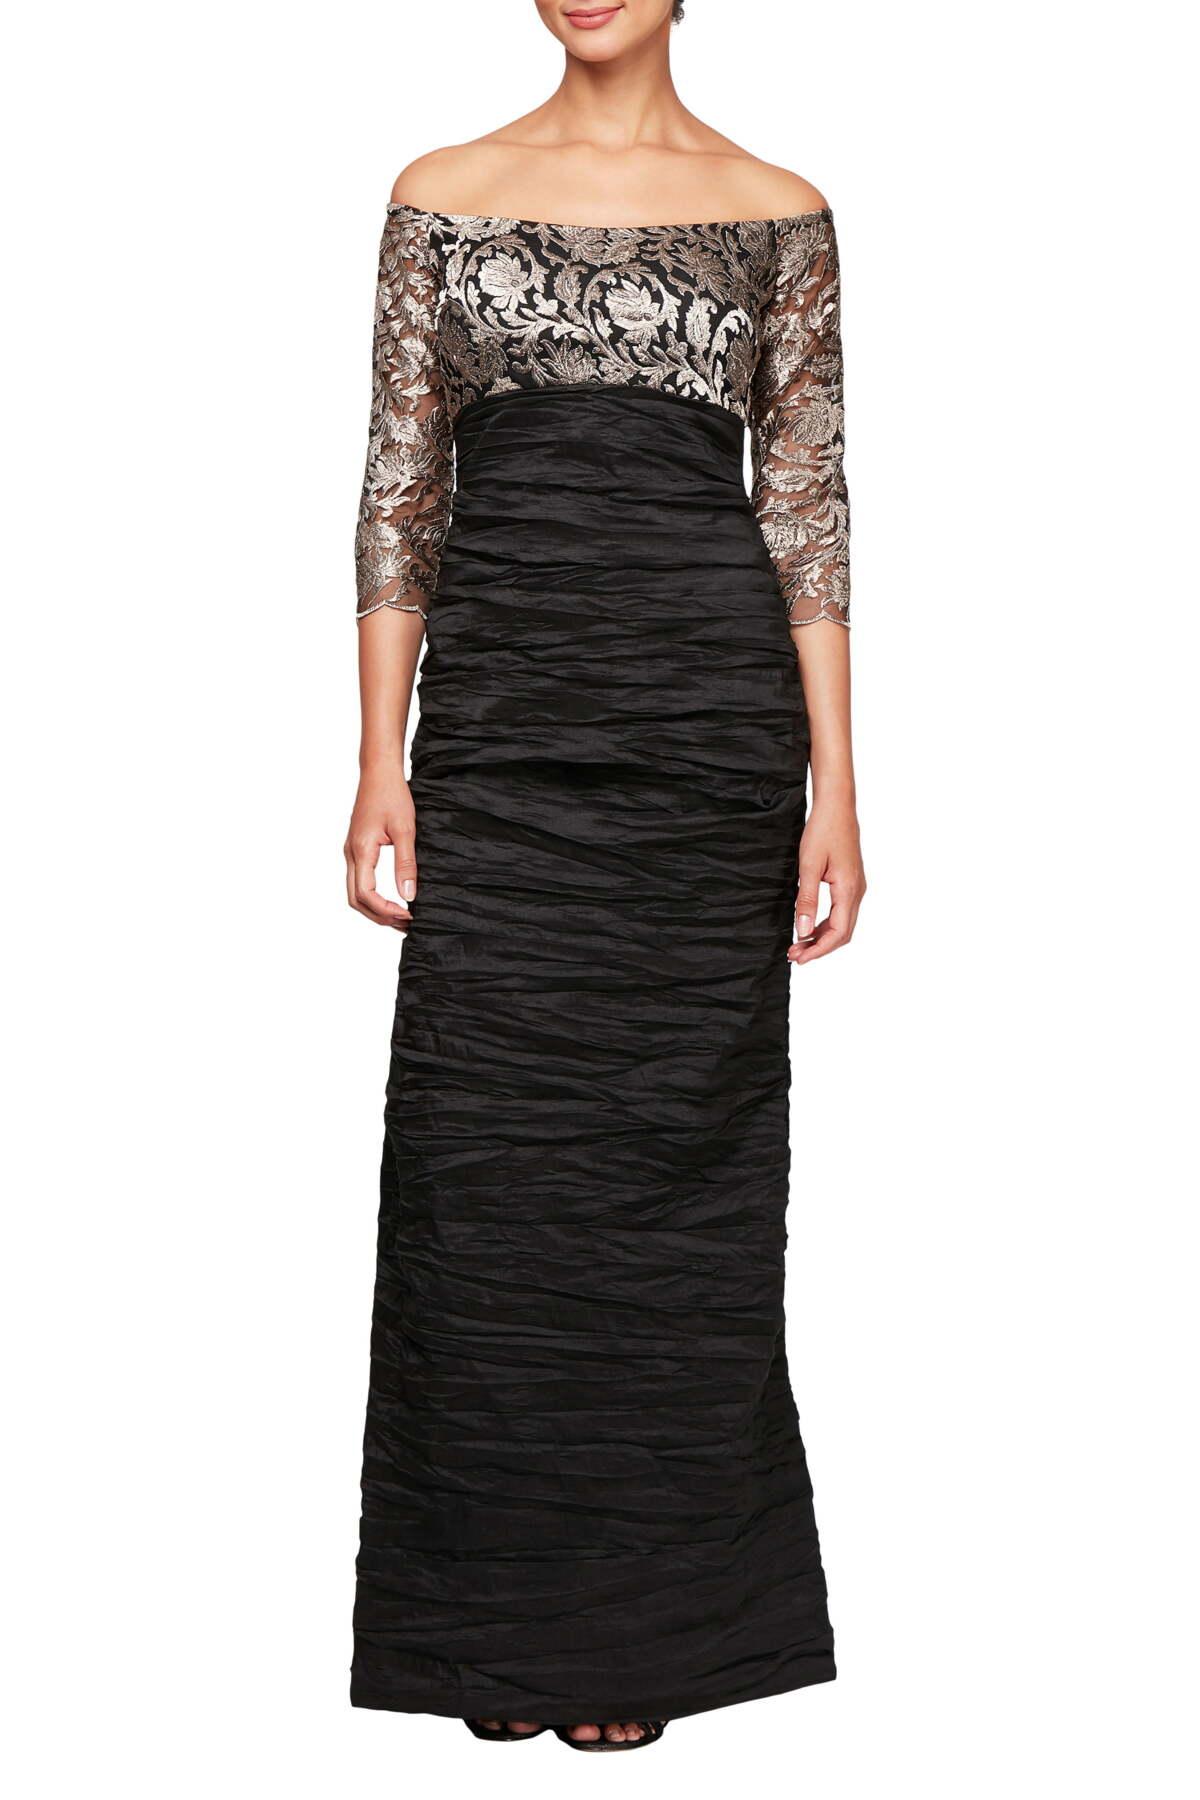 Alex Evenings Off-the-shoulder Embroidered Empire Waist Dress in Black ...